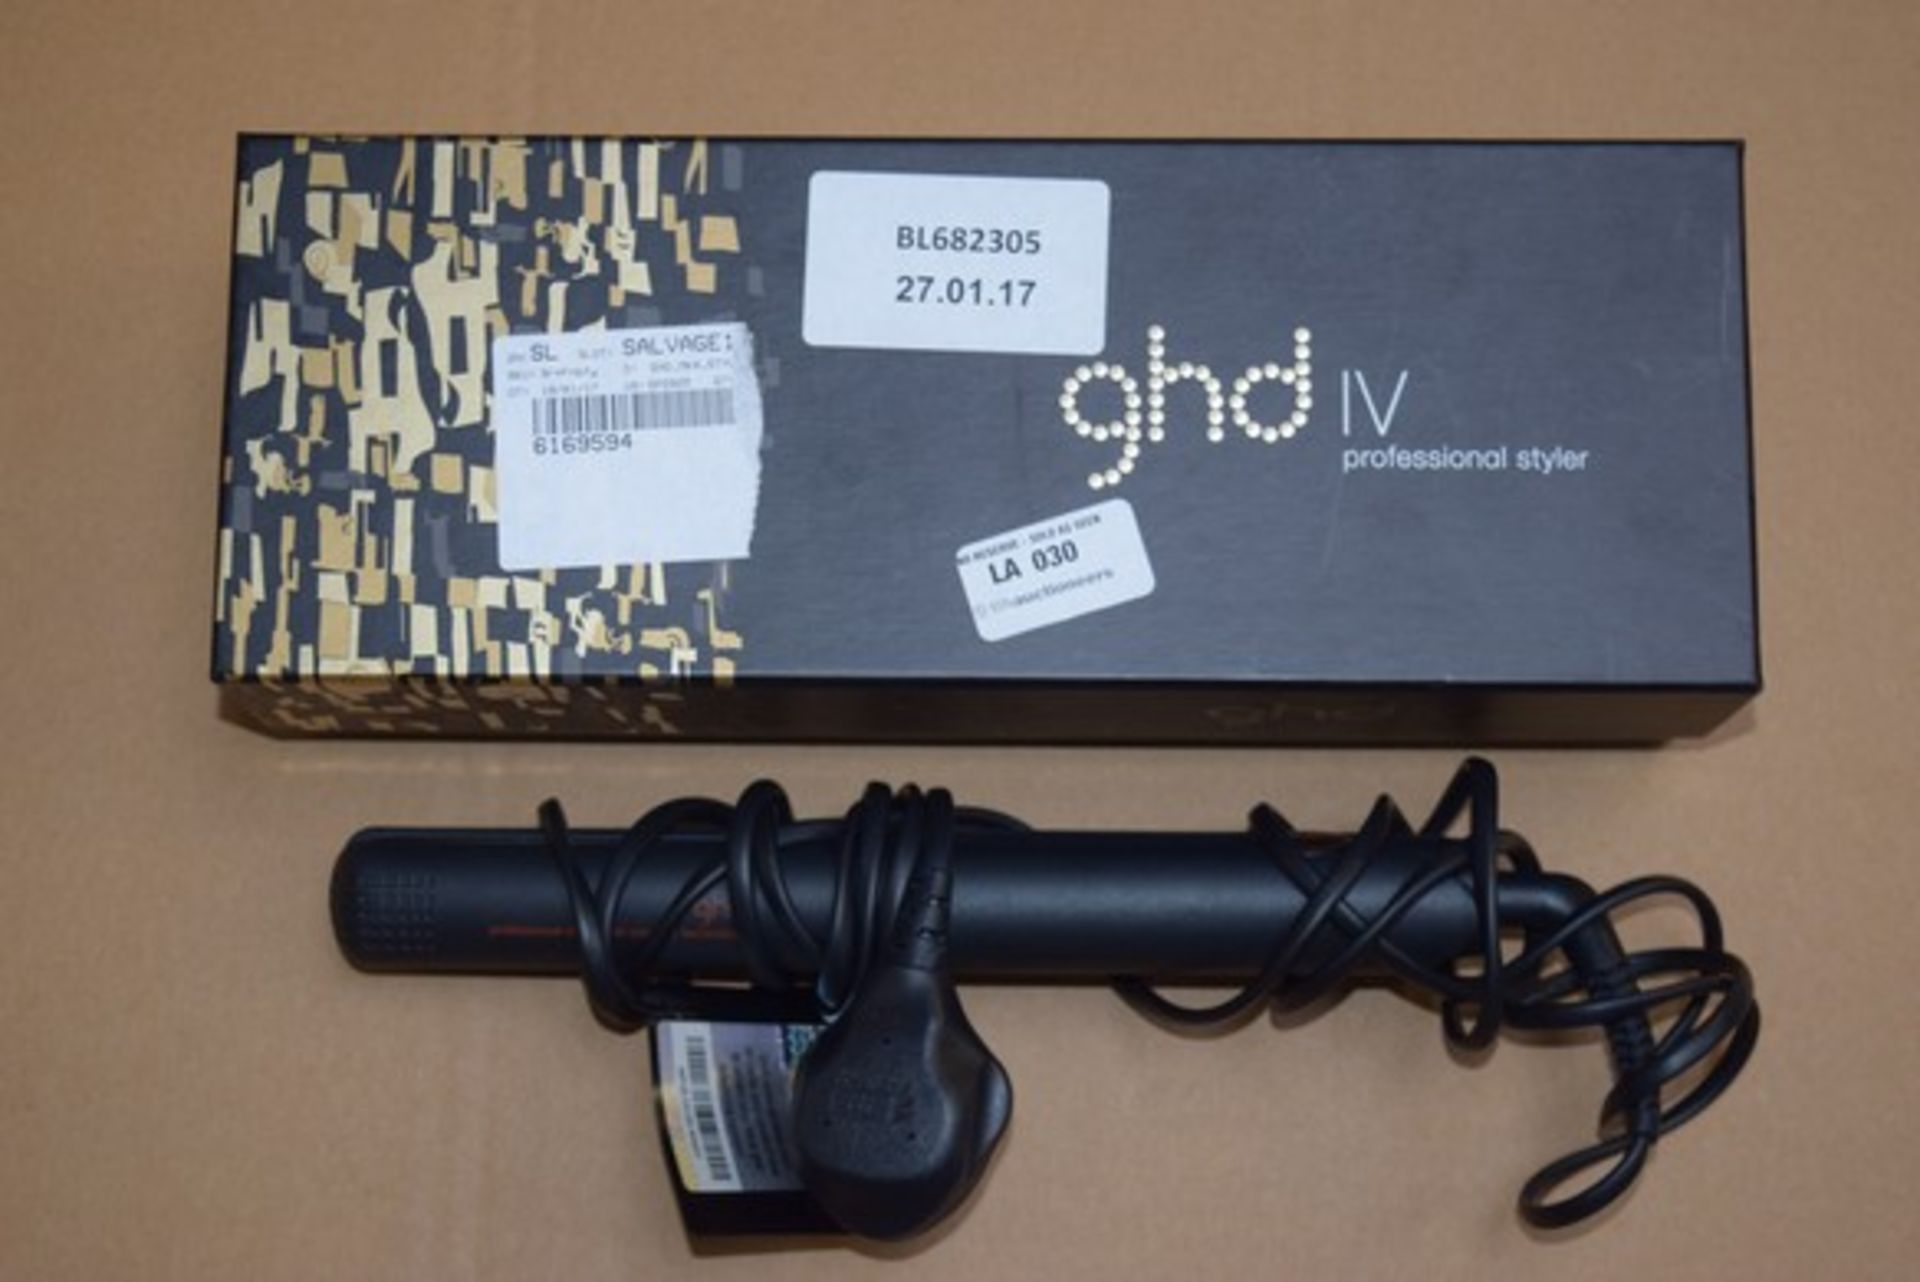 1 X BOXED GHD IV PROFESSIONAL HAIR STRAIGHTENERS RRP £145 27.01.17